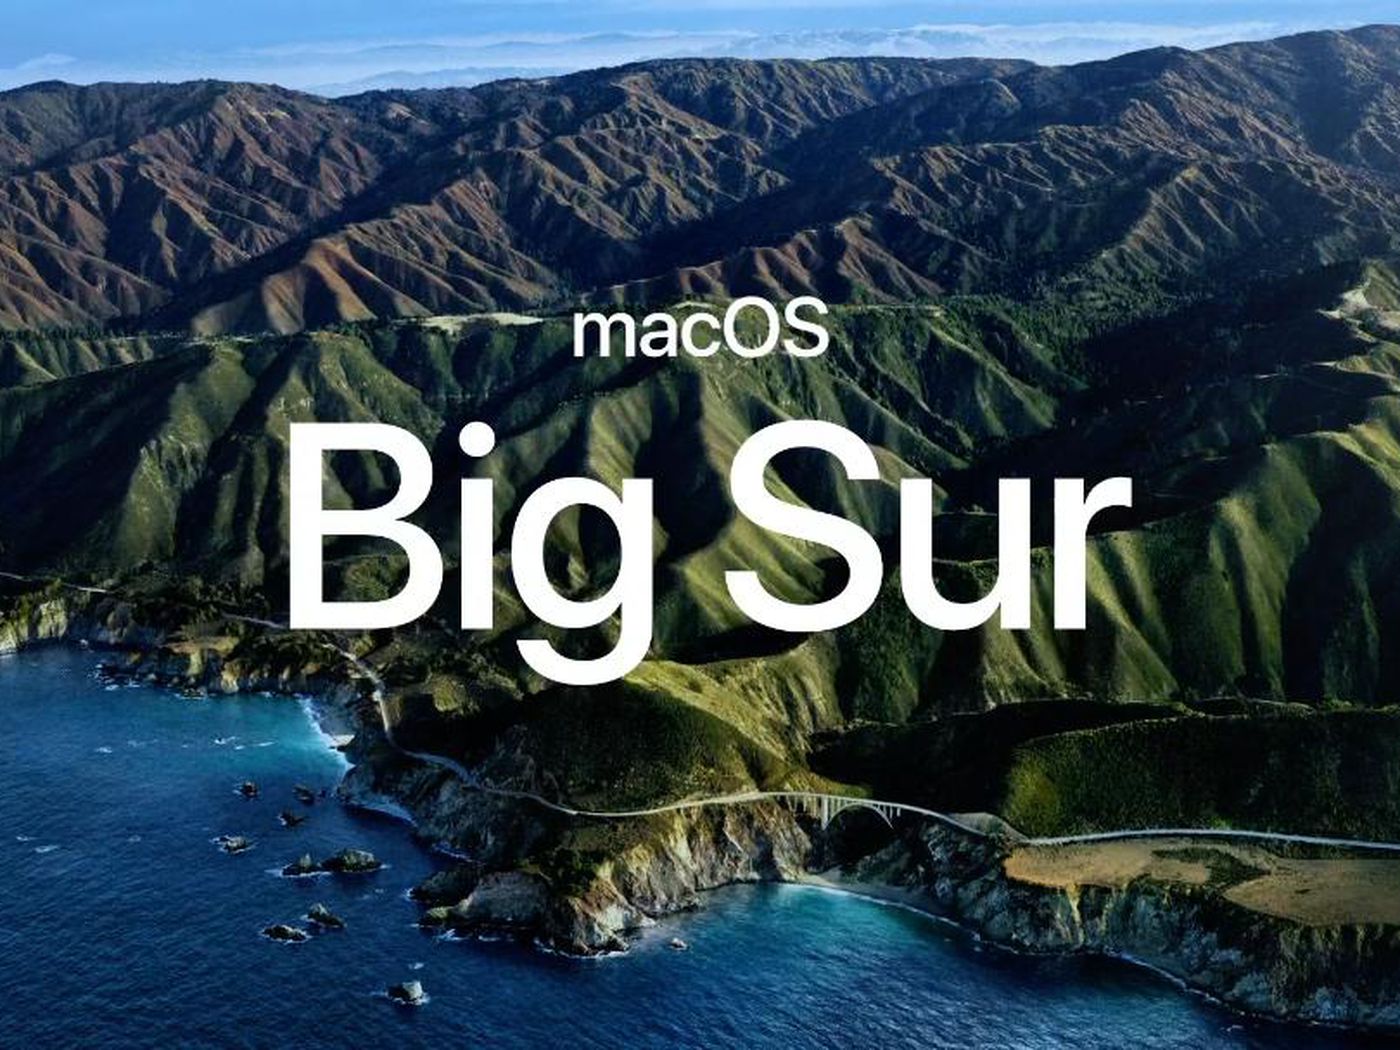 Should you upgrade your macOS to BigSur AMT ELectronics laptop imac and pc water damage repair at cheap price we are located in melbourne CBD